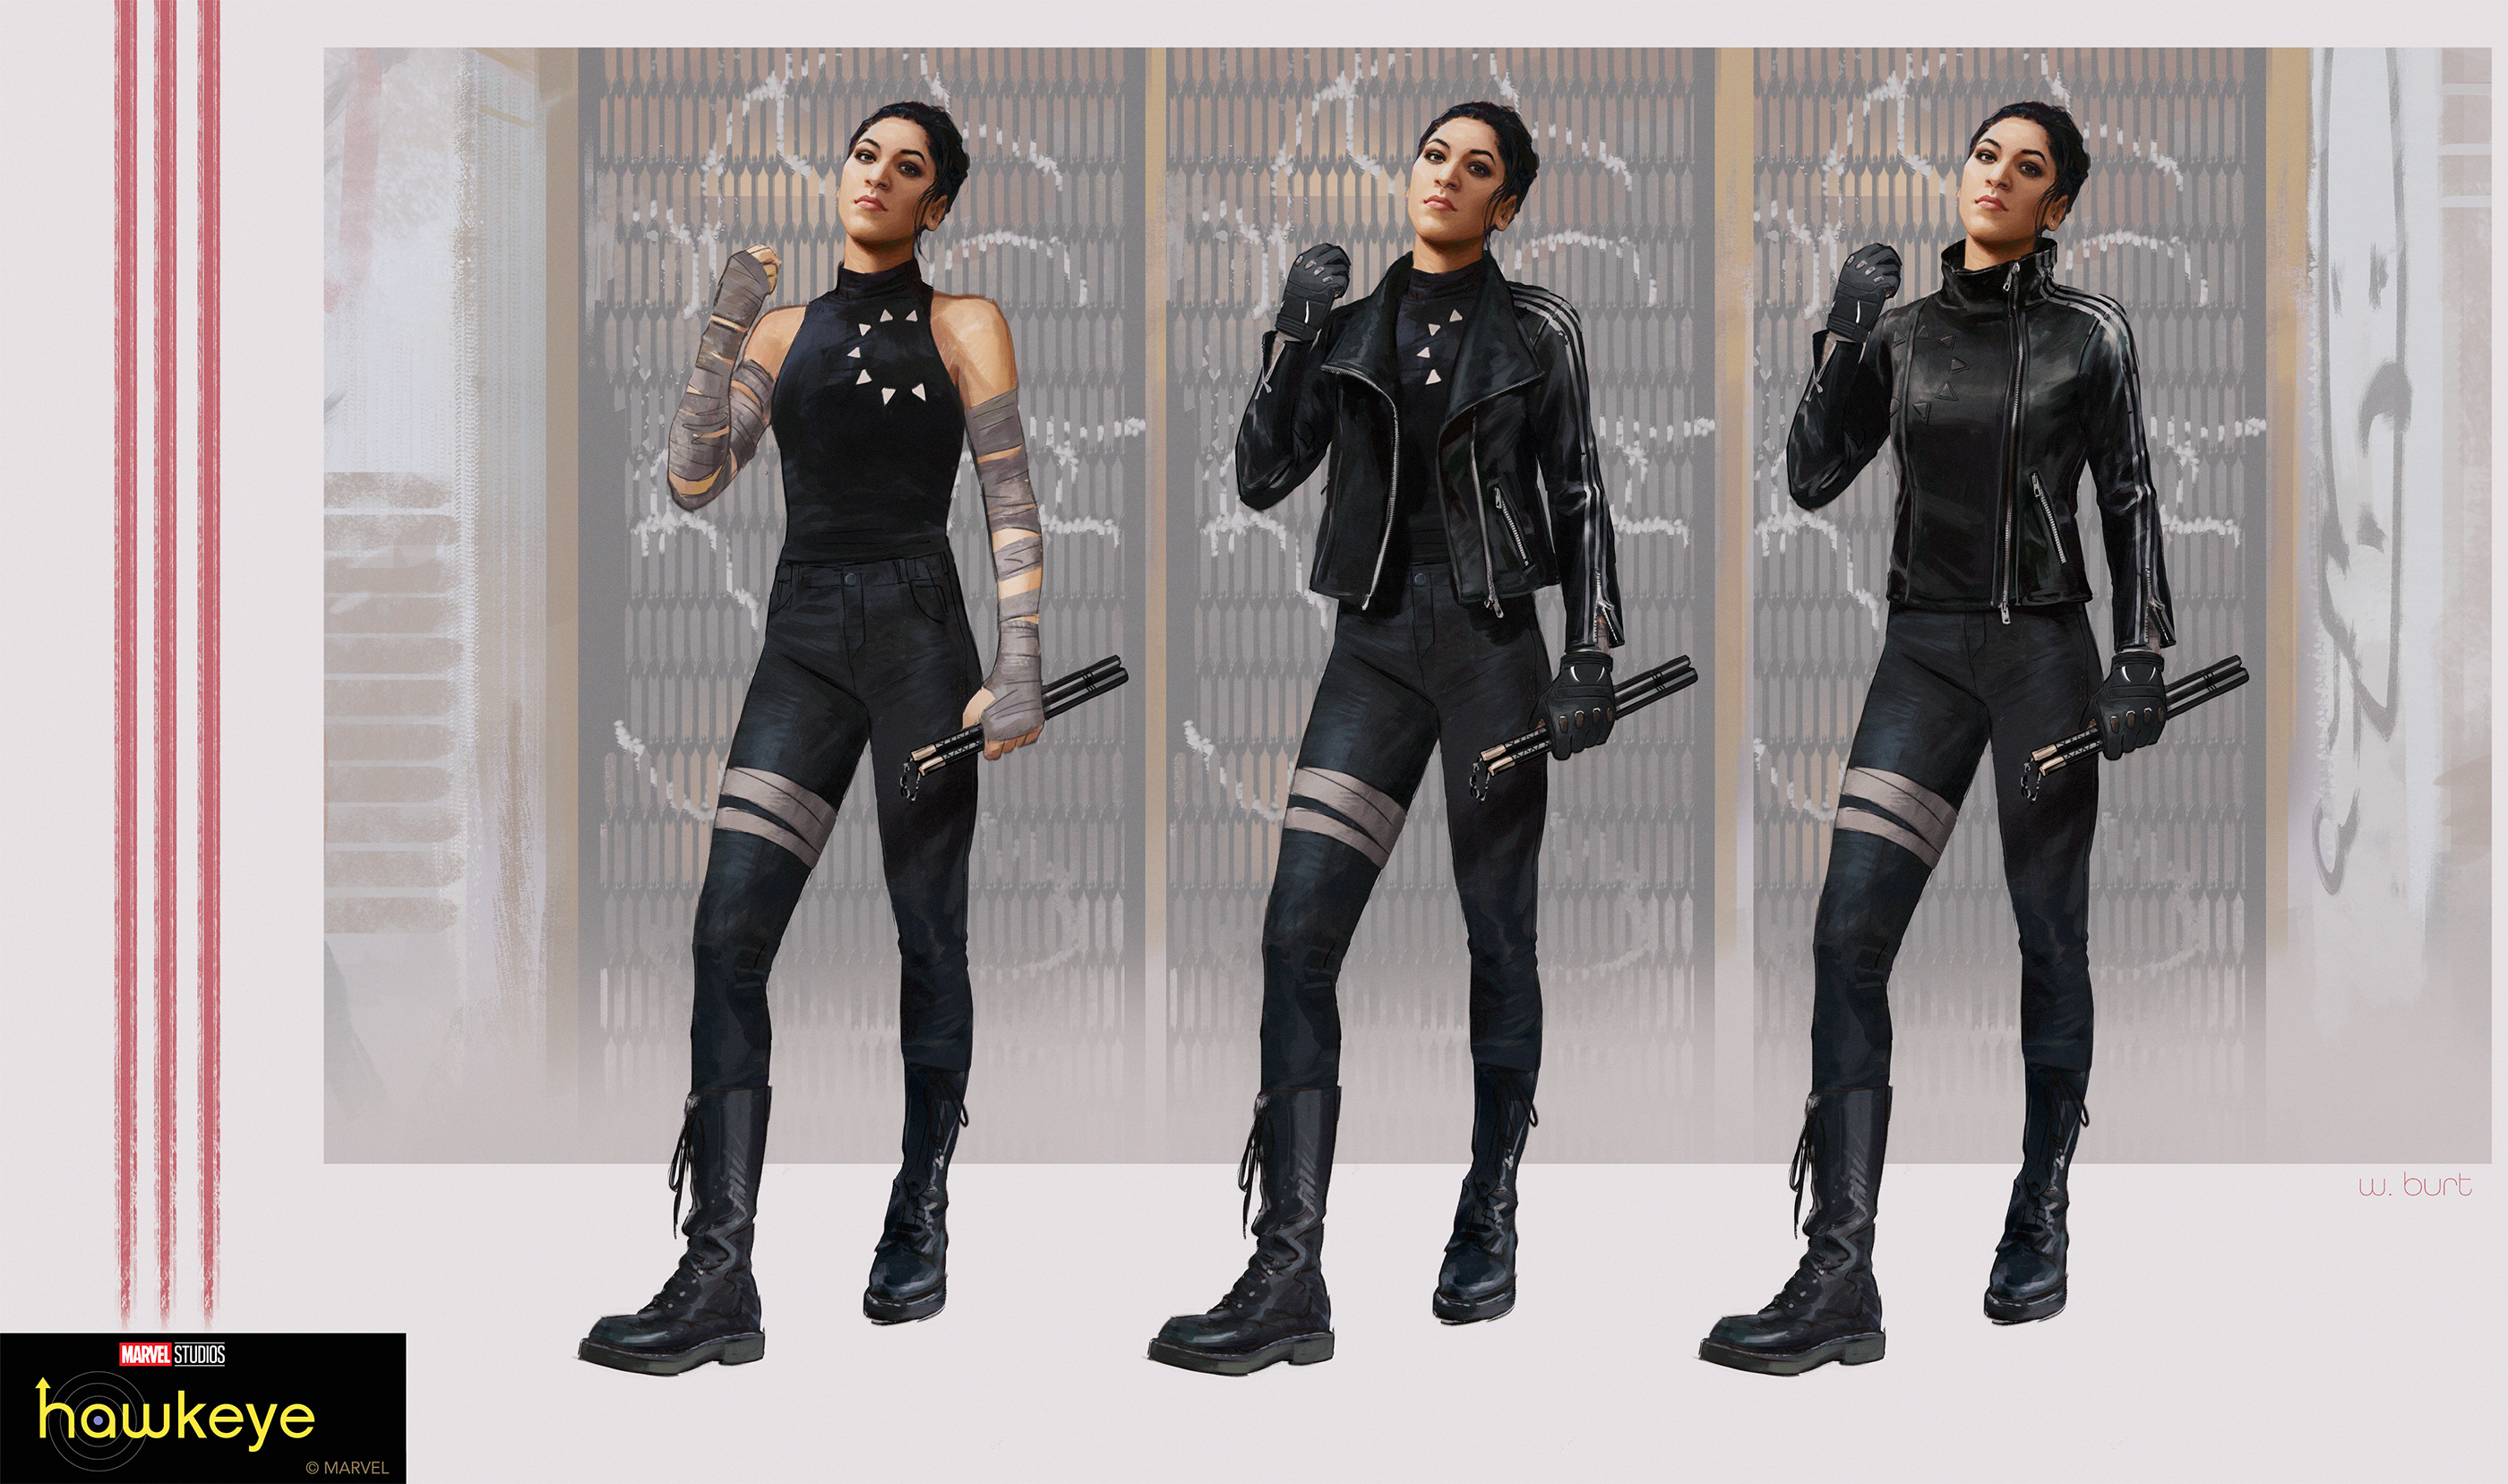 Hawyeke Concept Art Shows Off Early Echo Costumes 